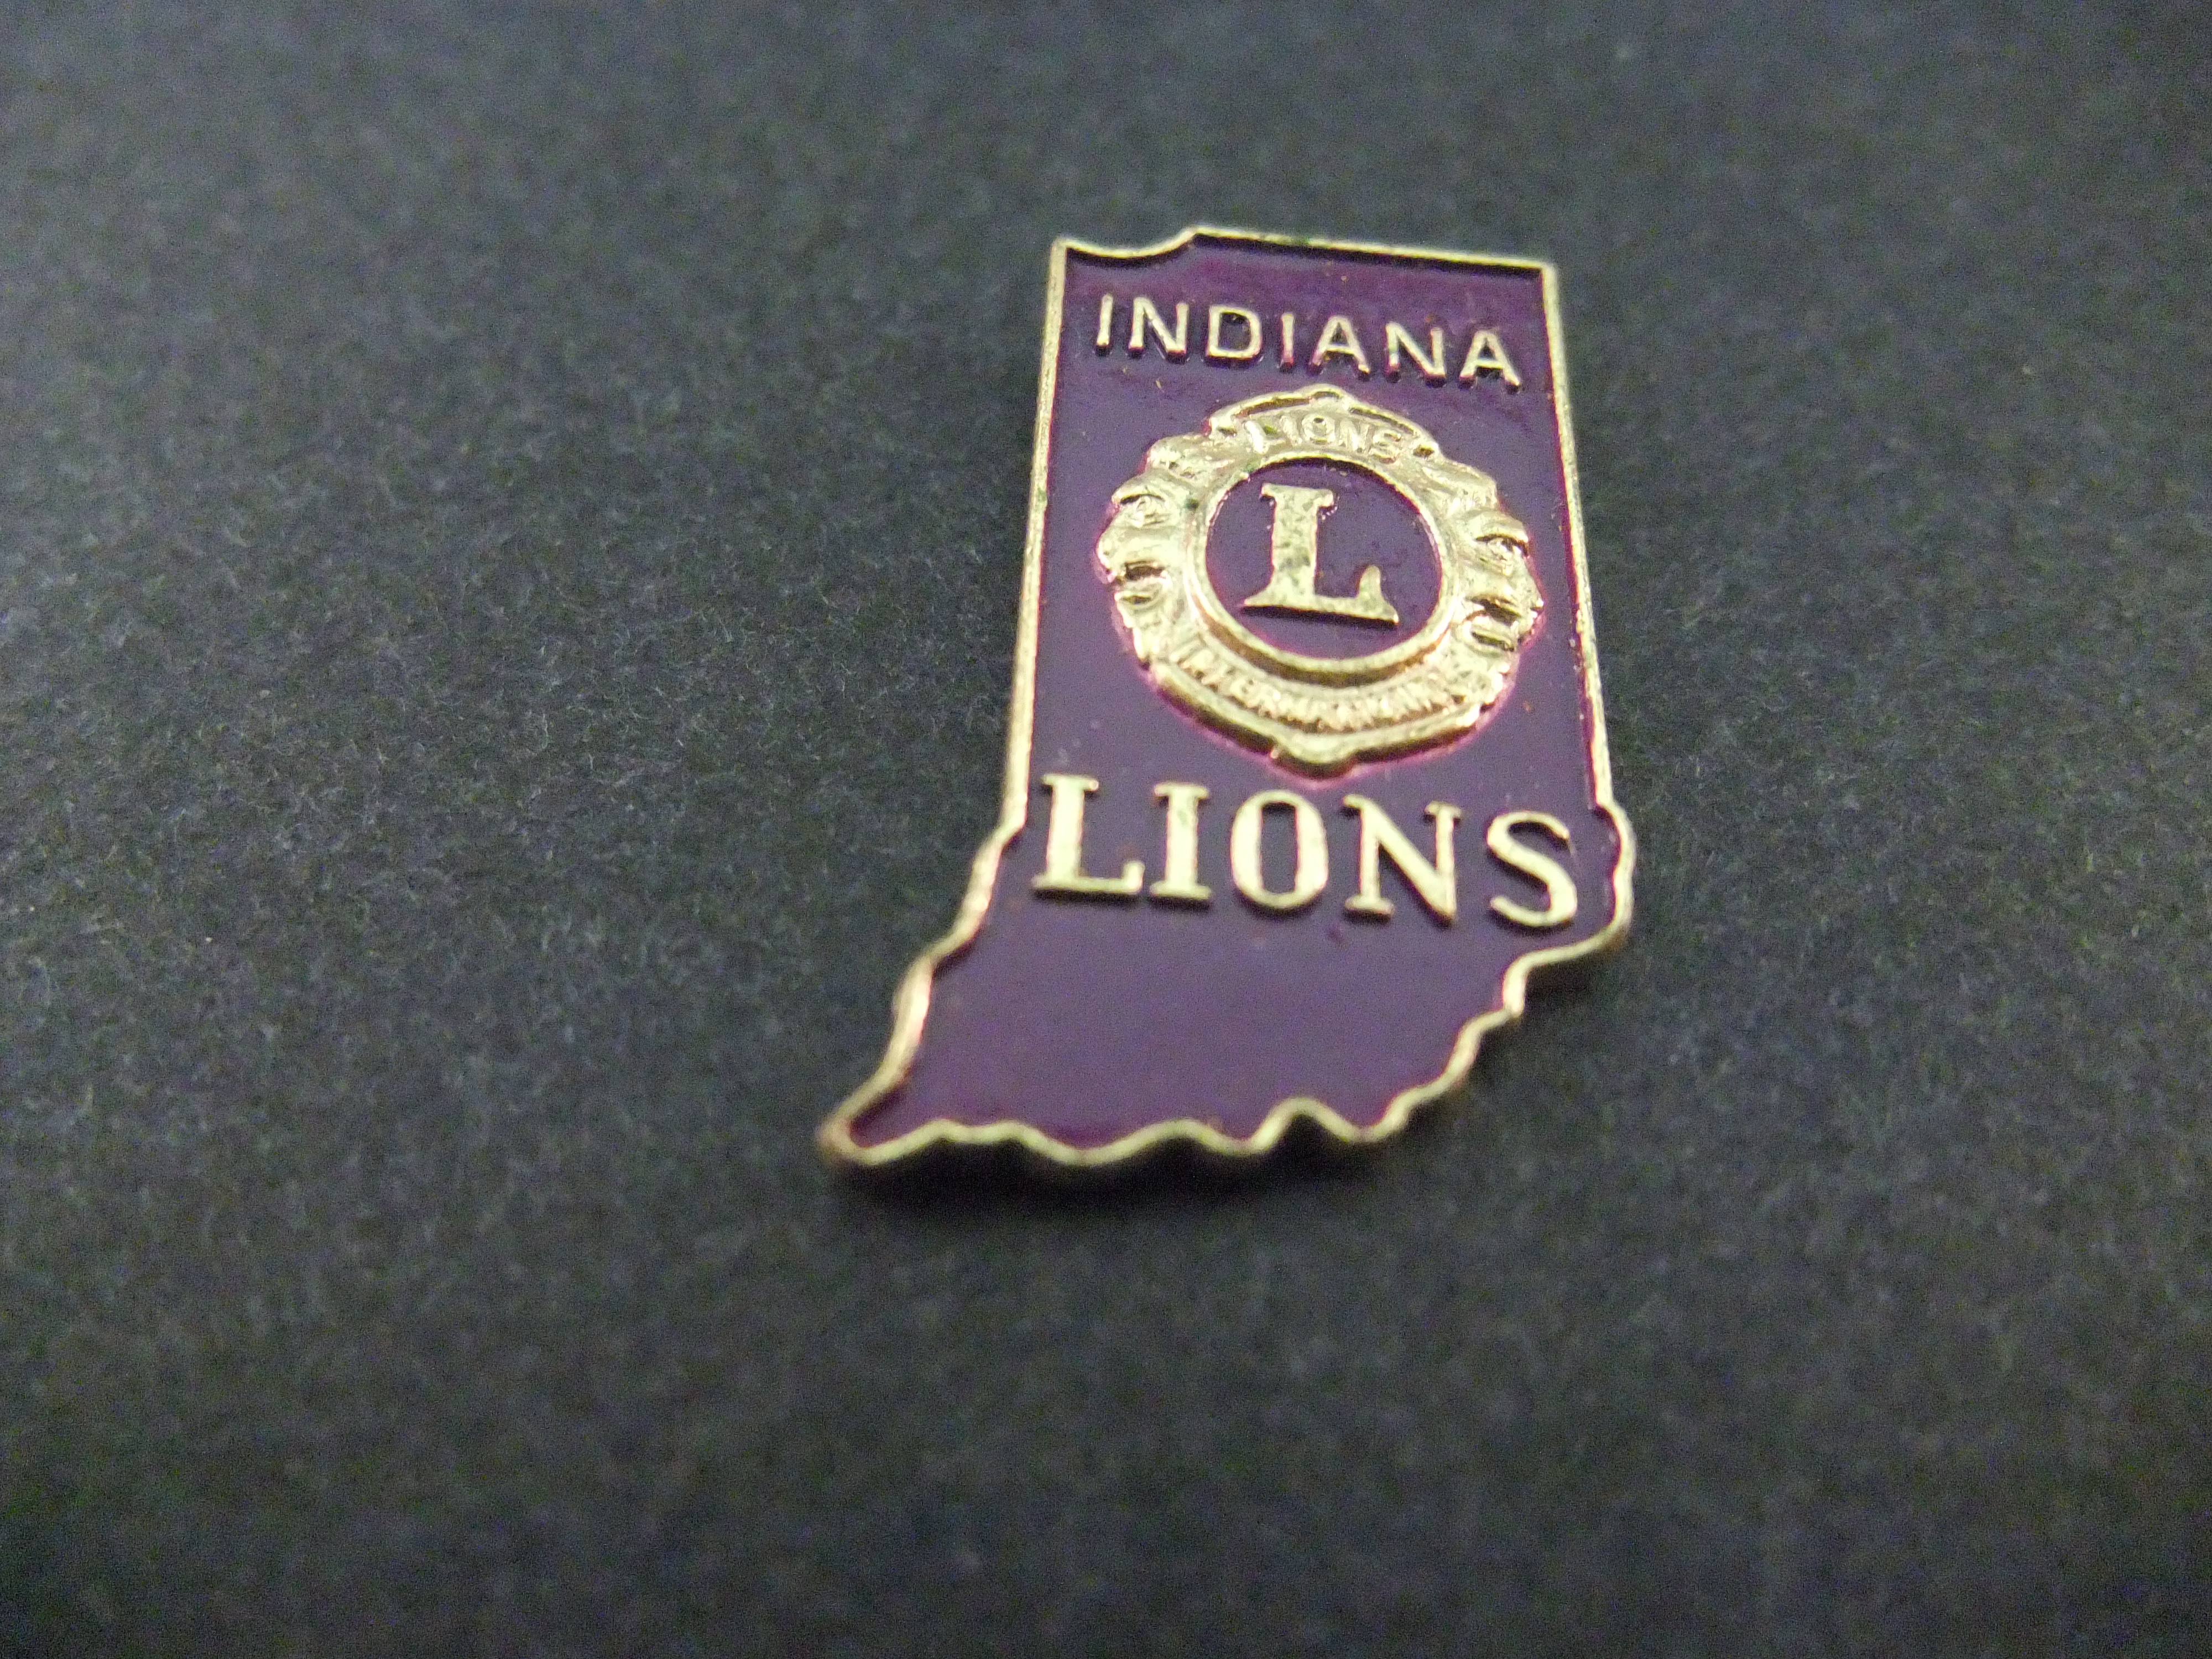 The Indiana Lions Club